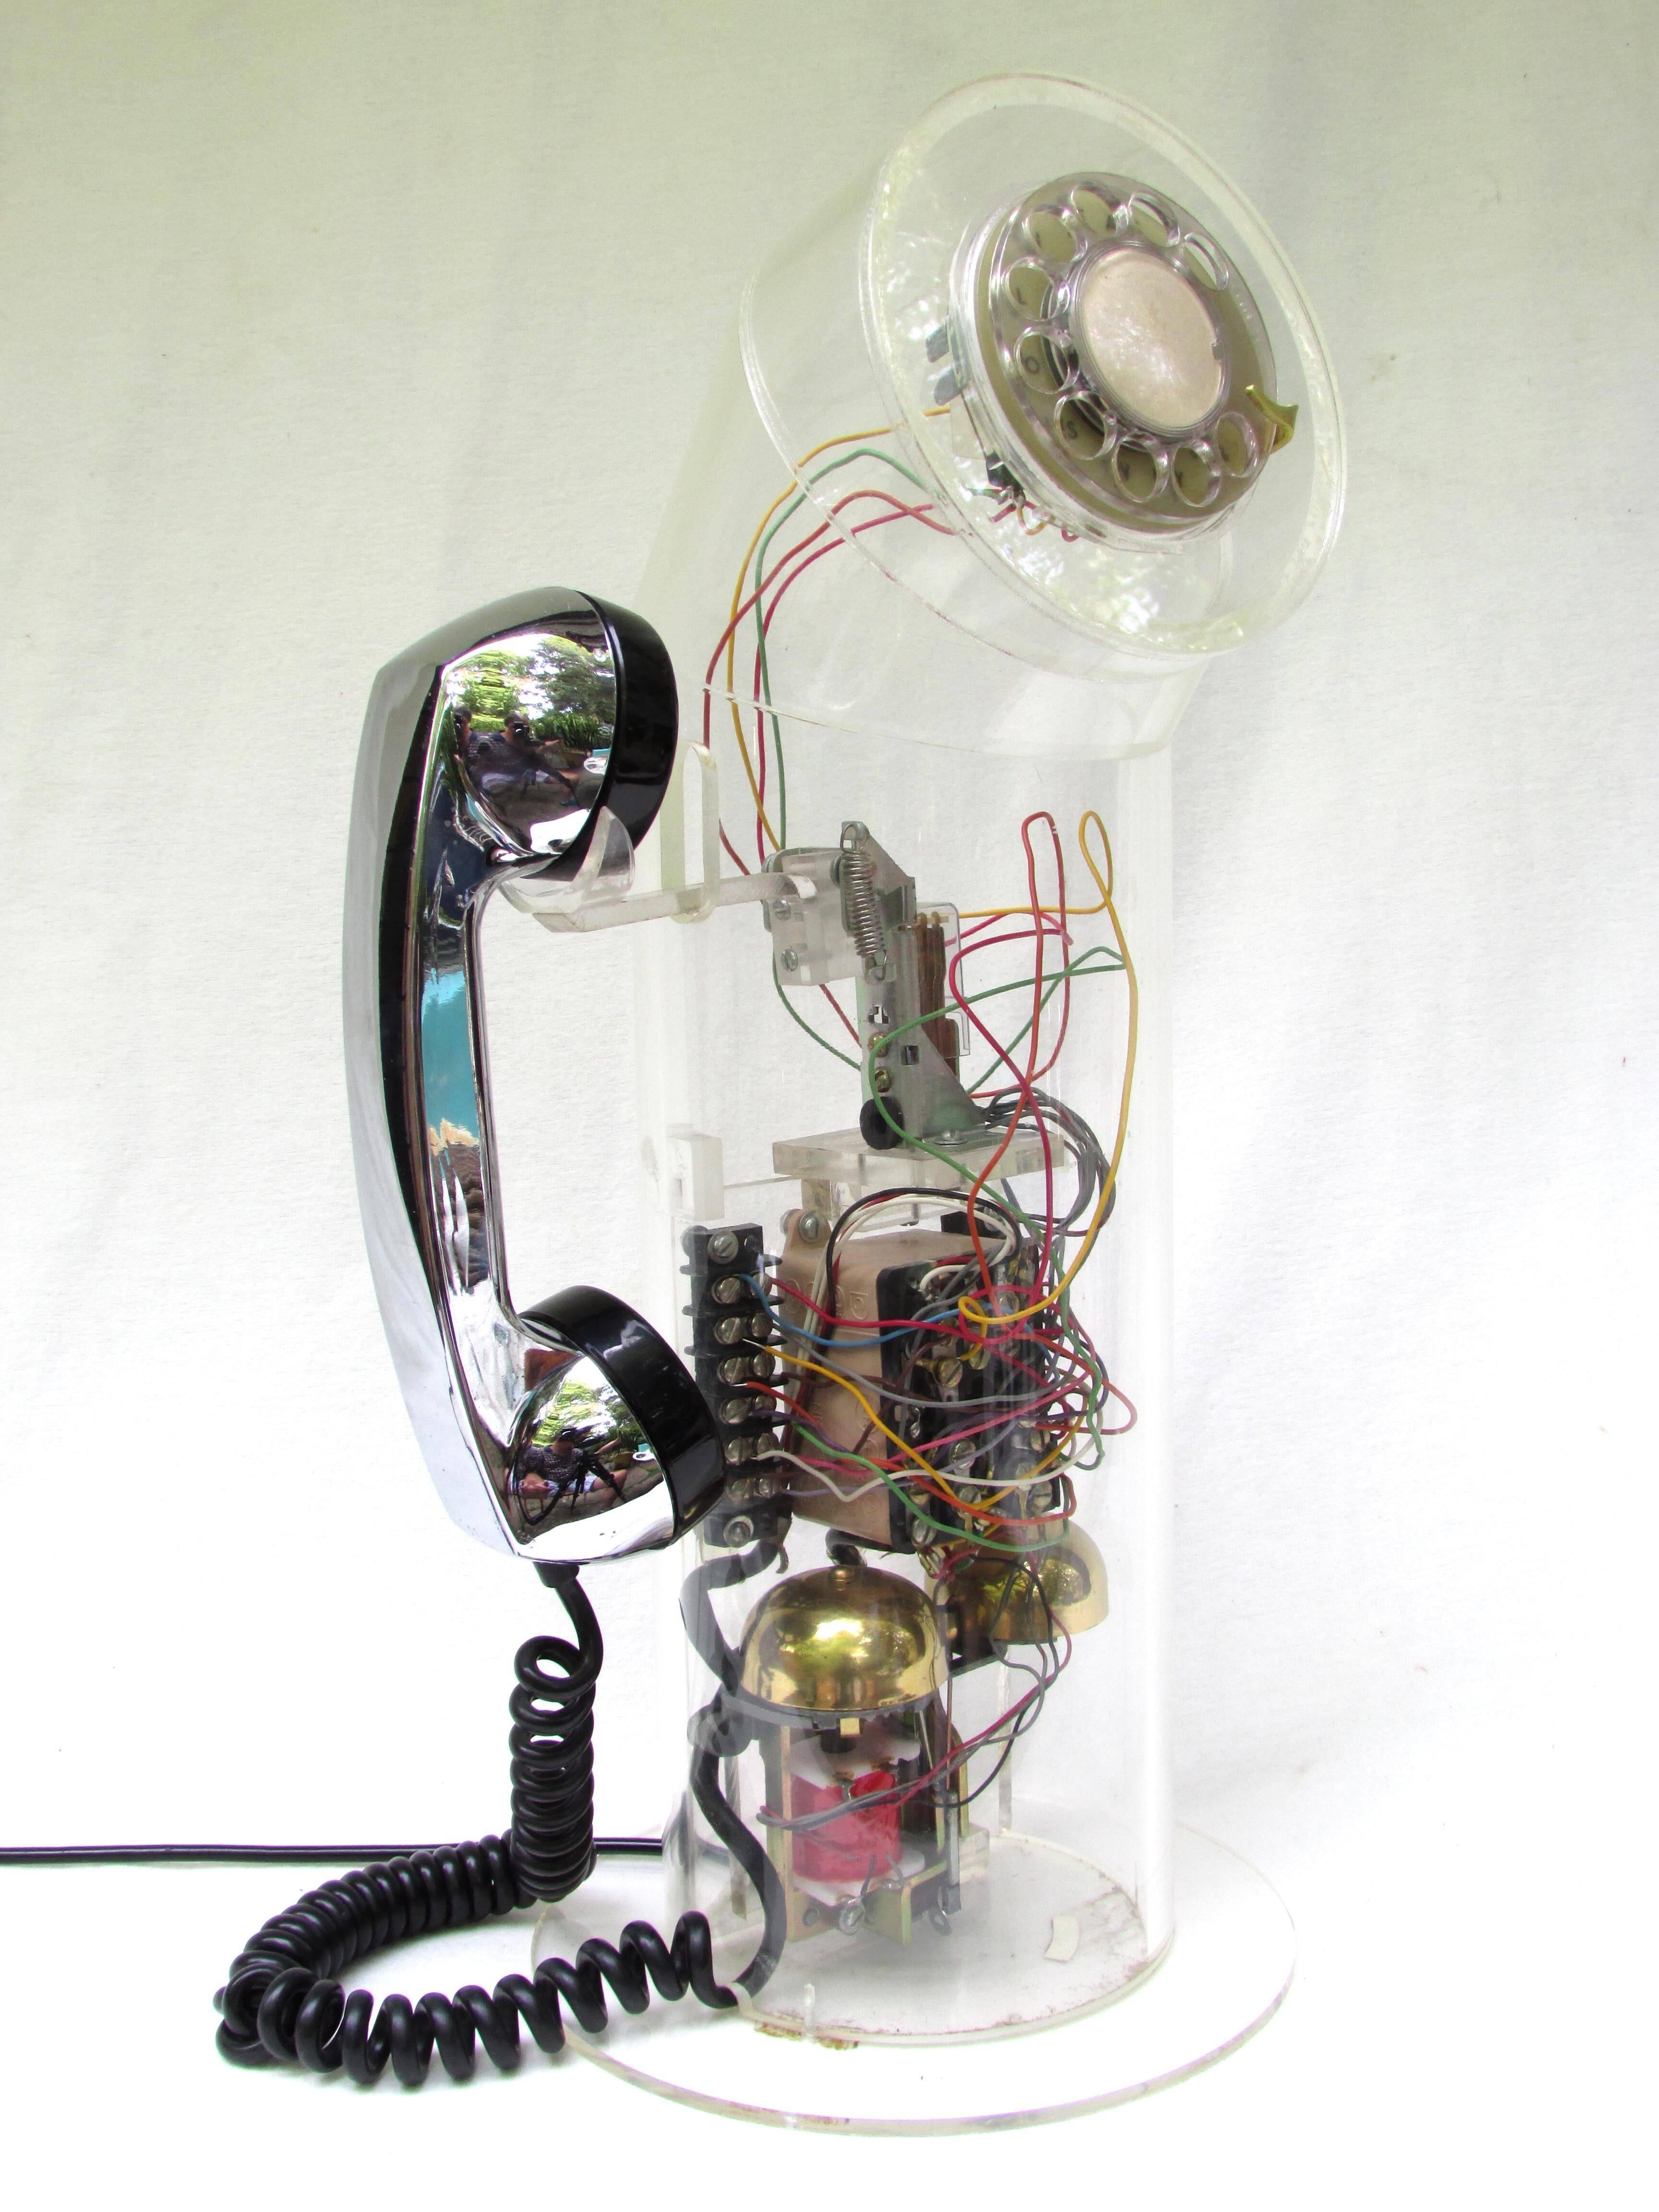 Vintage fascinating Lucite tube telephone with all the wires and bells exposed.